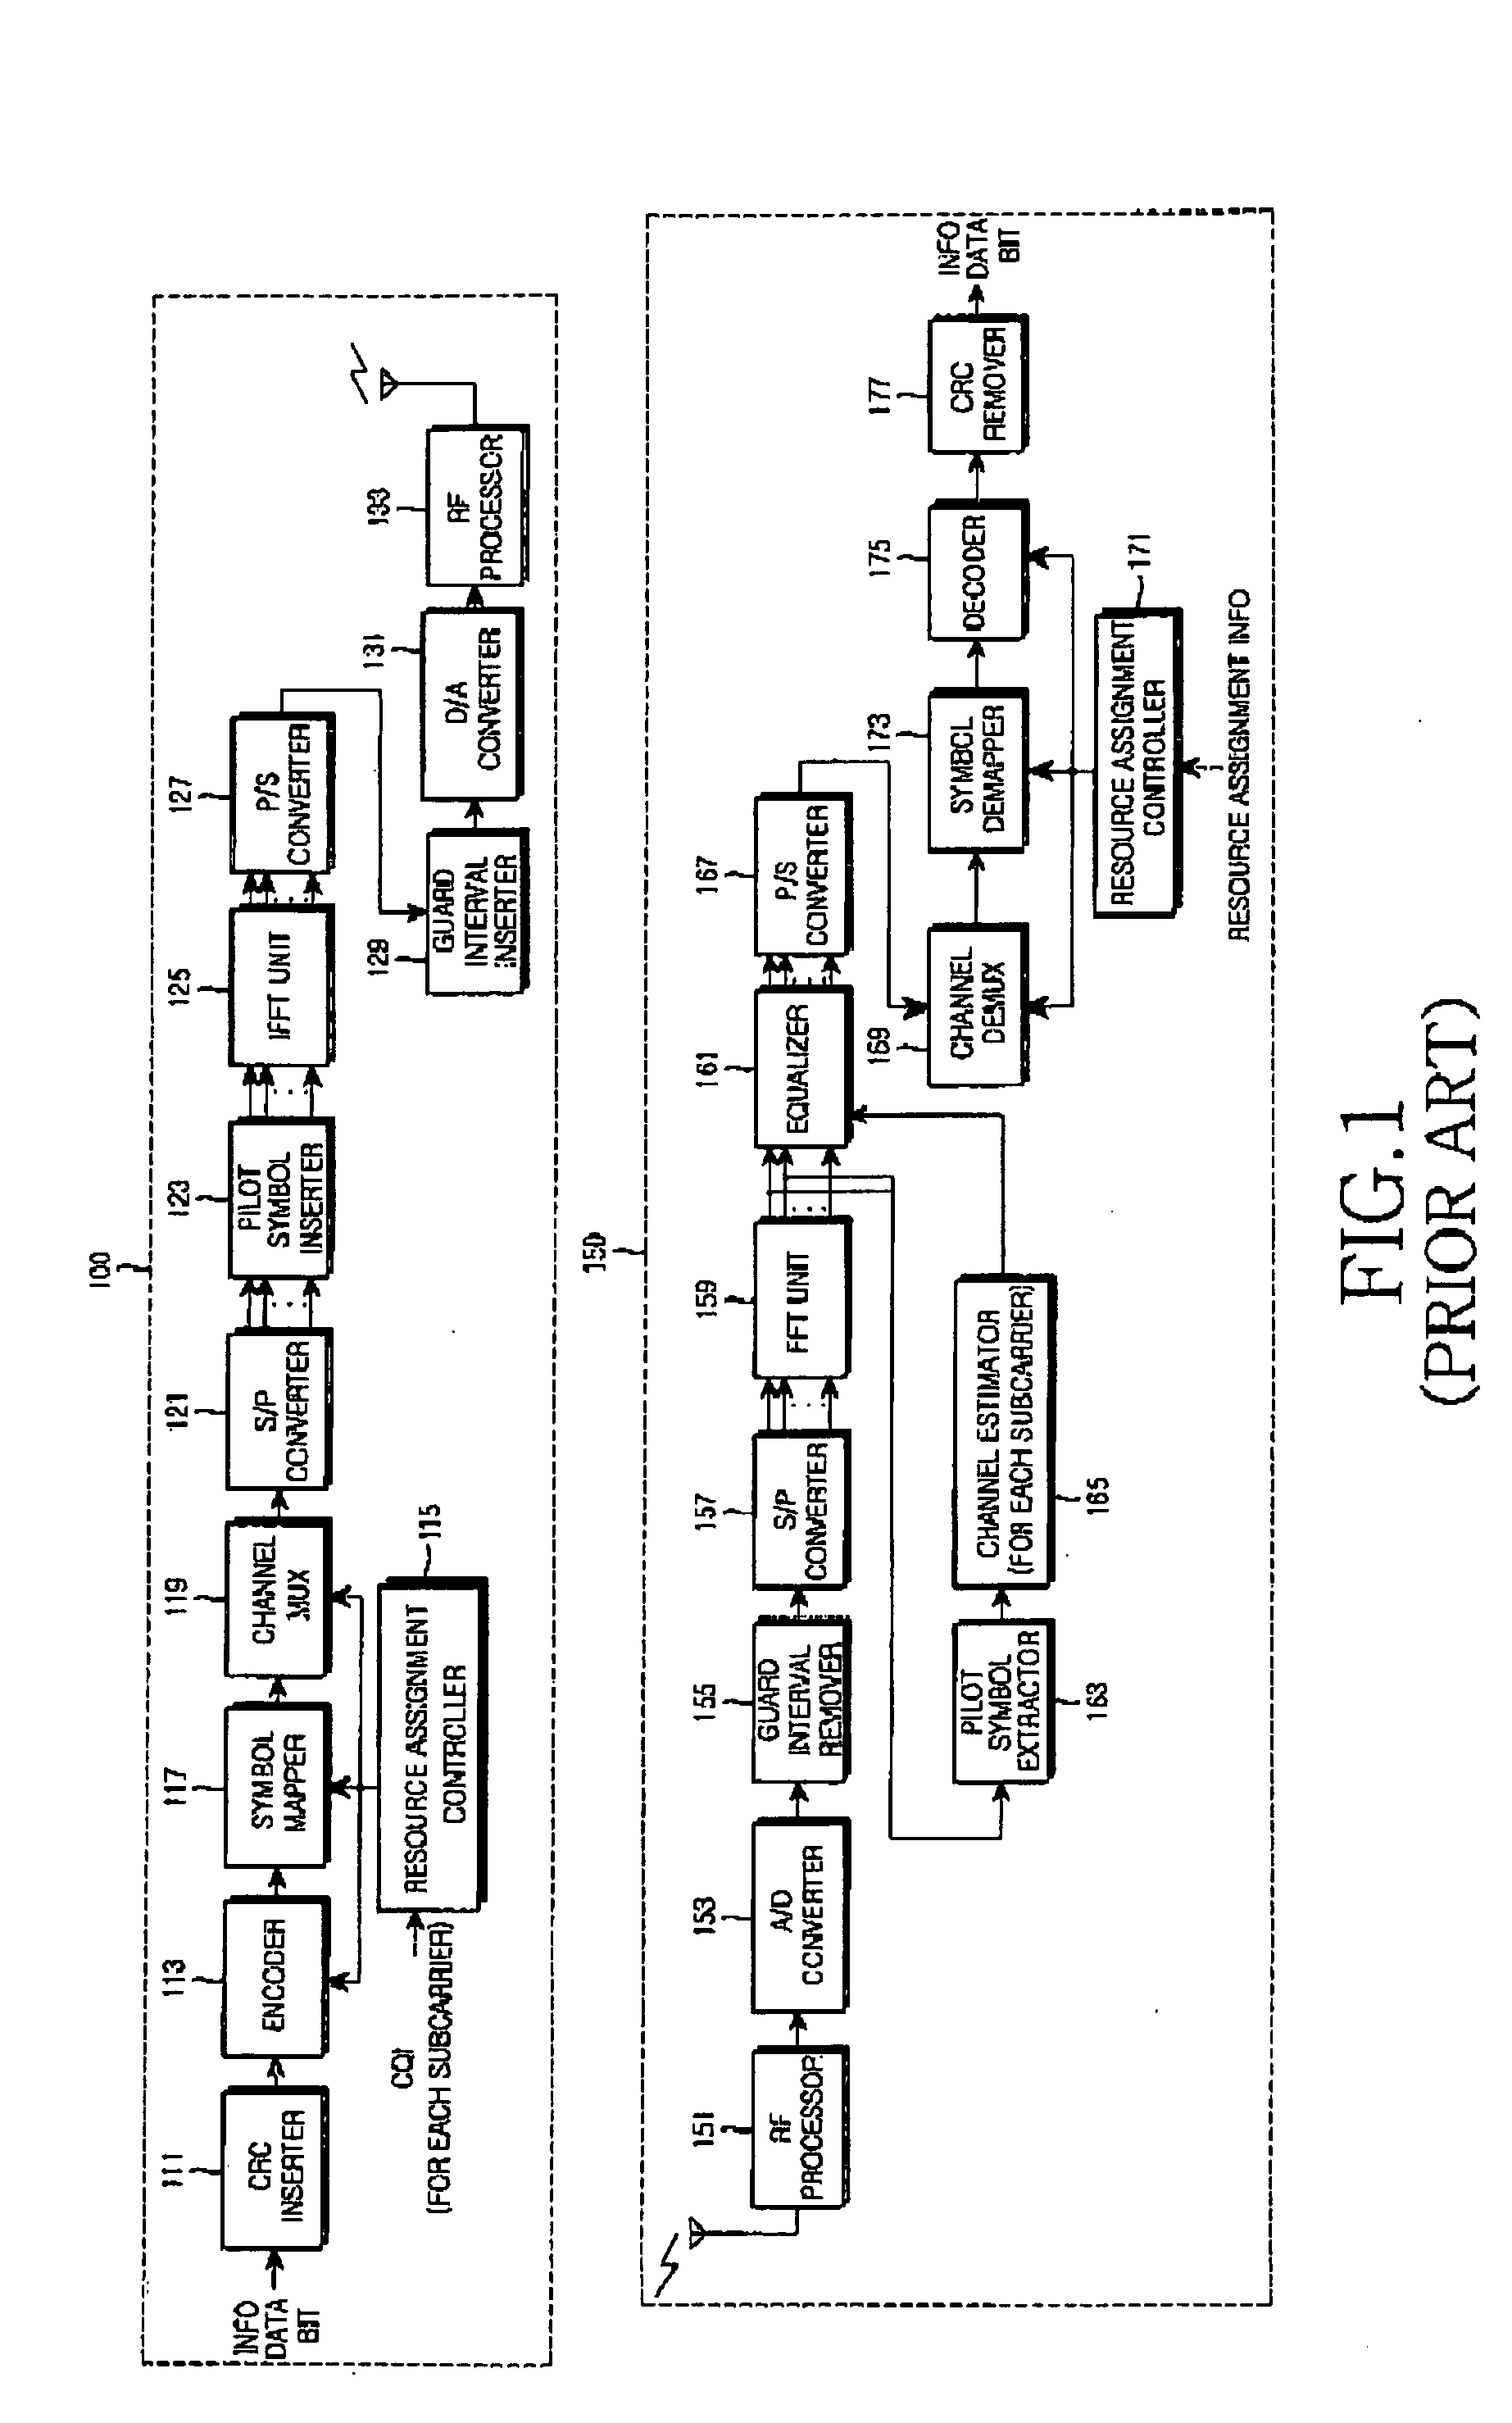 Apparatus and method for dynamically assigning resources in an OFDM communication system